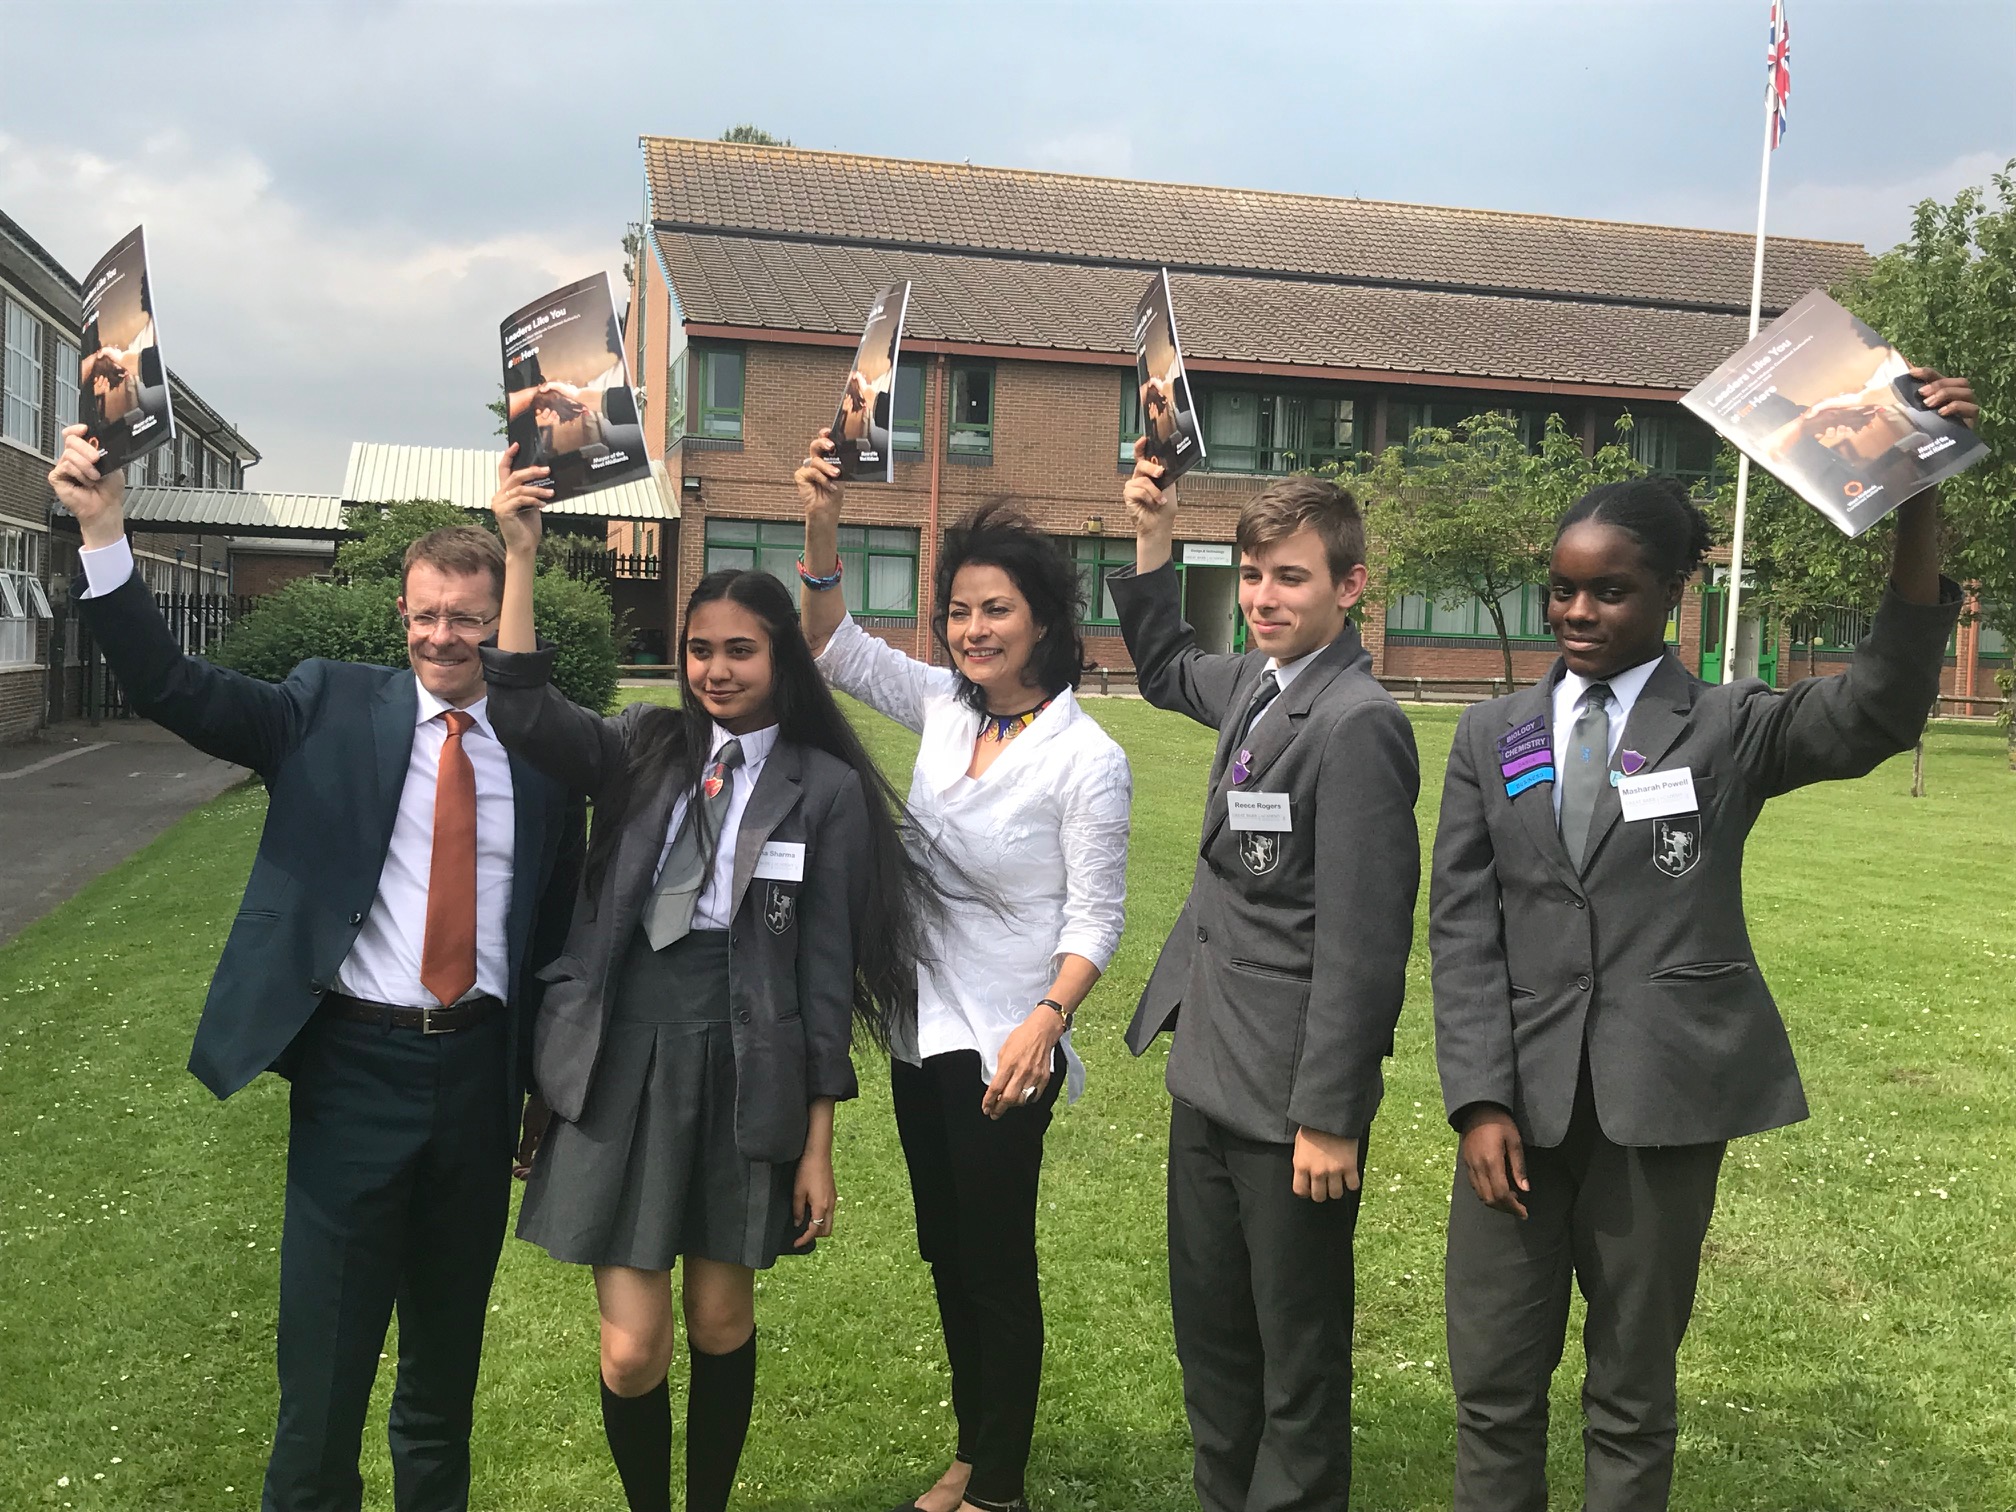 Mayor of the West Midlands Andy Street (left) with Anita Bhalla OBE (centre) and young people at the launch of the Leaders Like You report